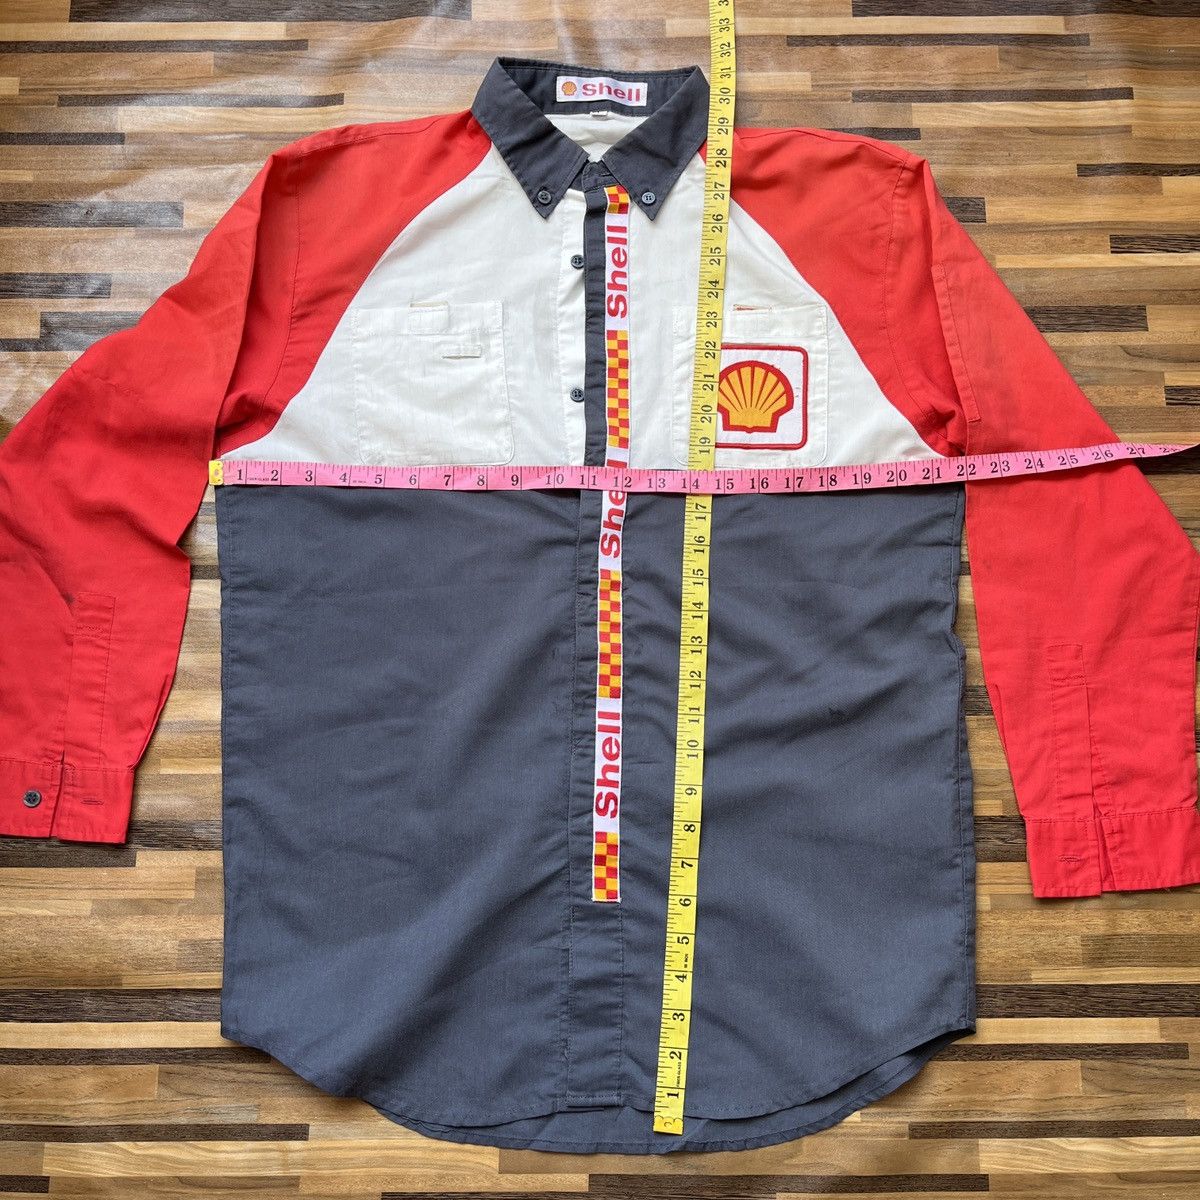 Shell Uniform Workers Vintage Japanese Outlet 1990s - 4